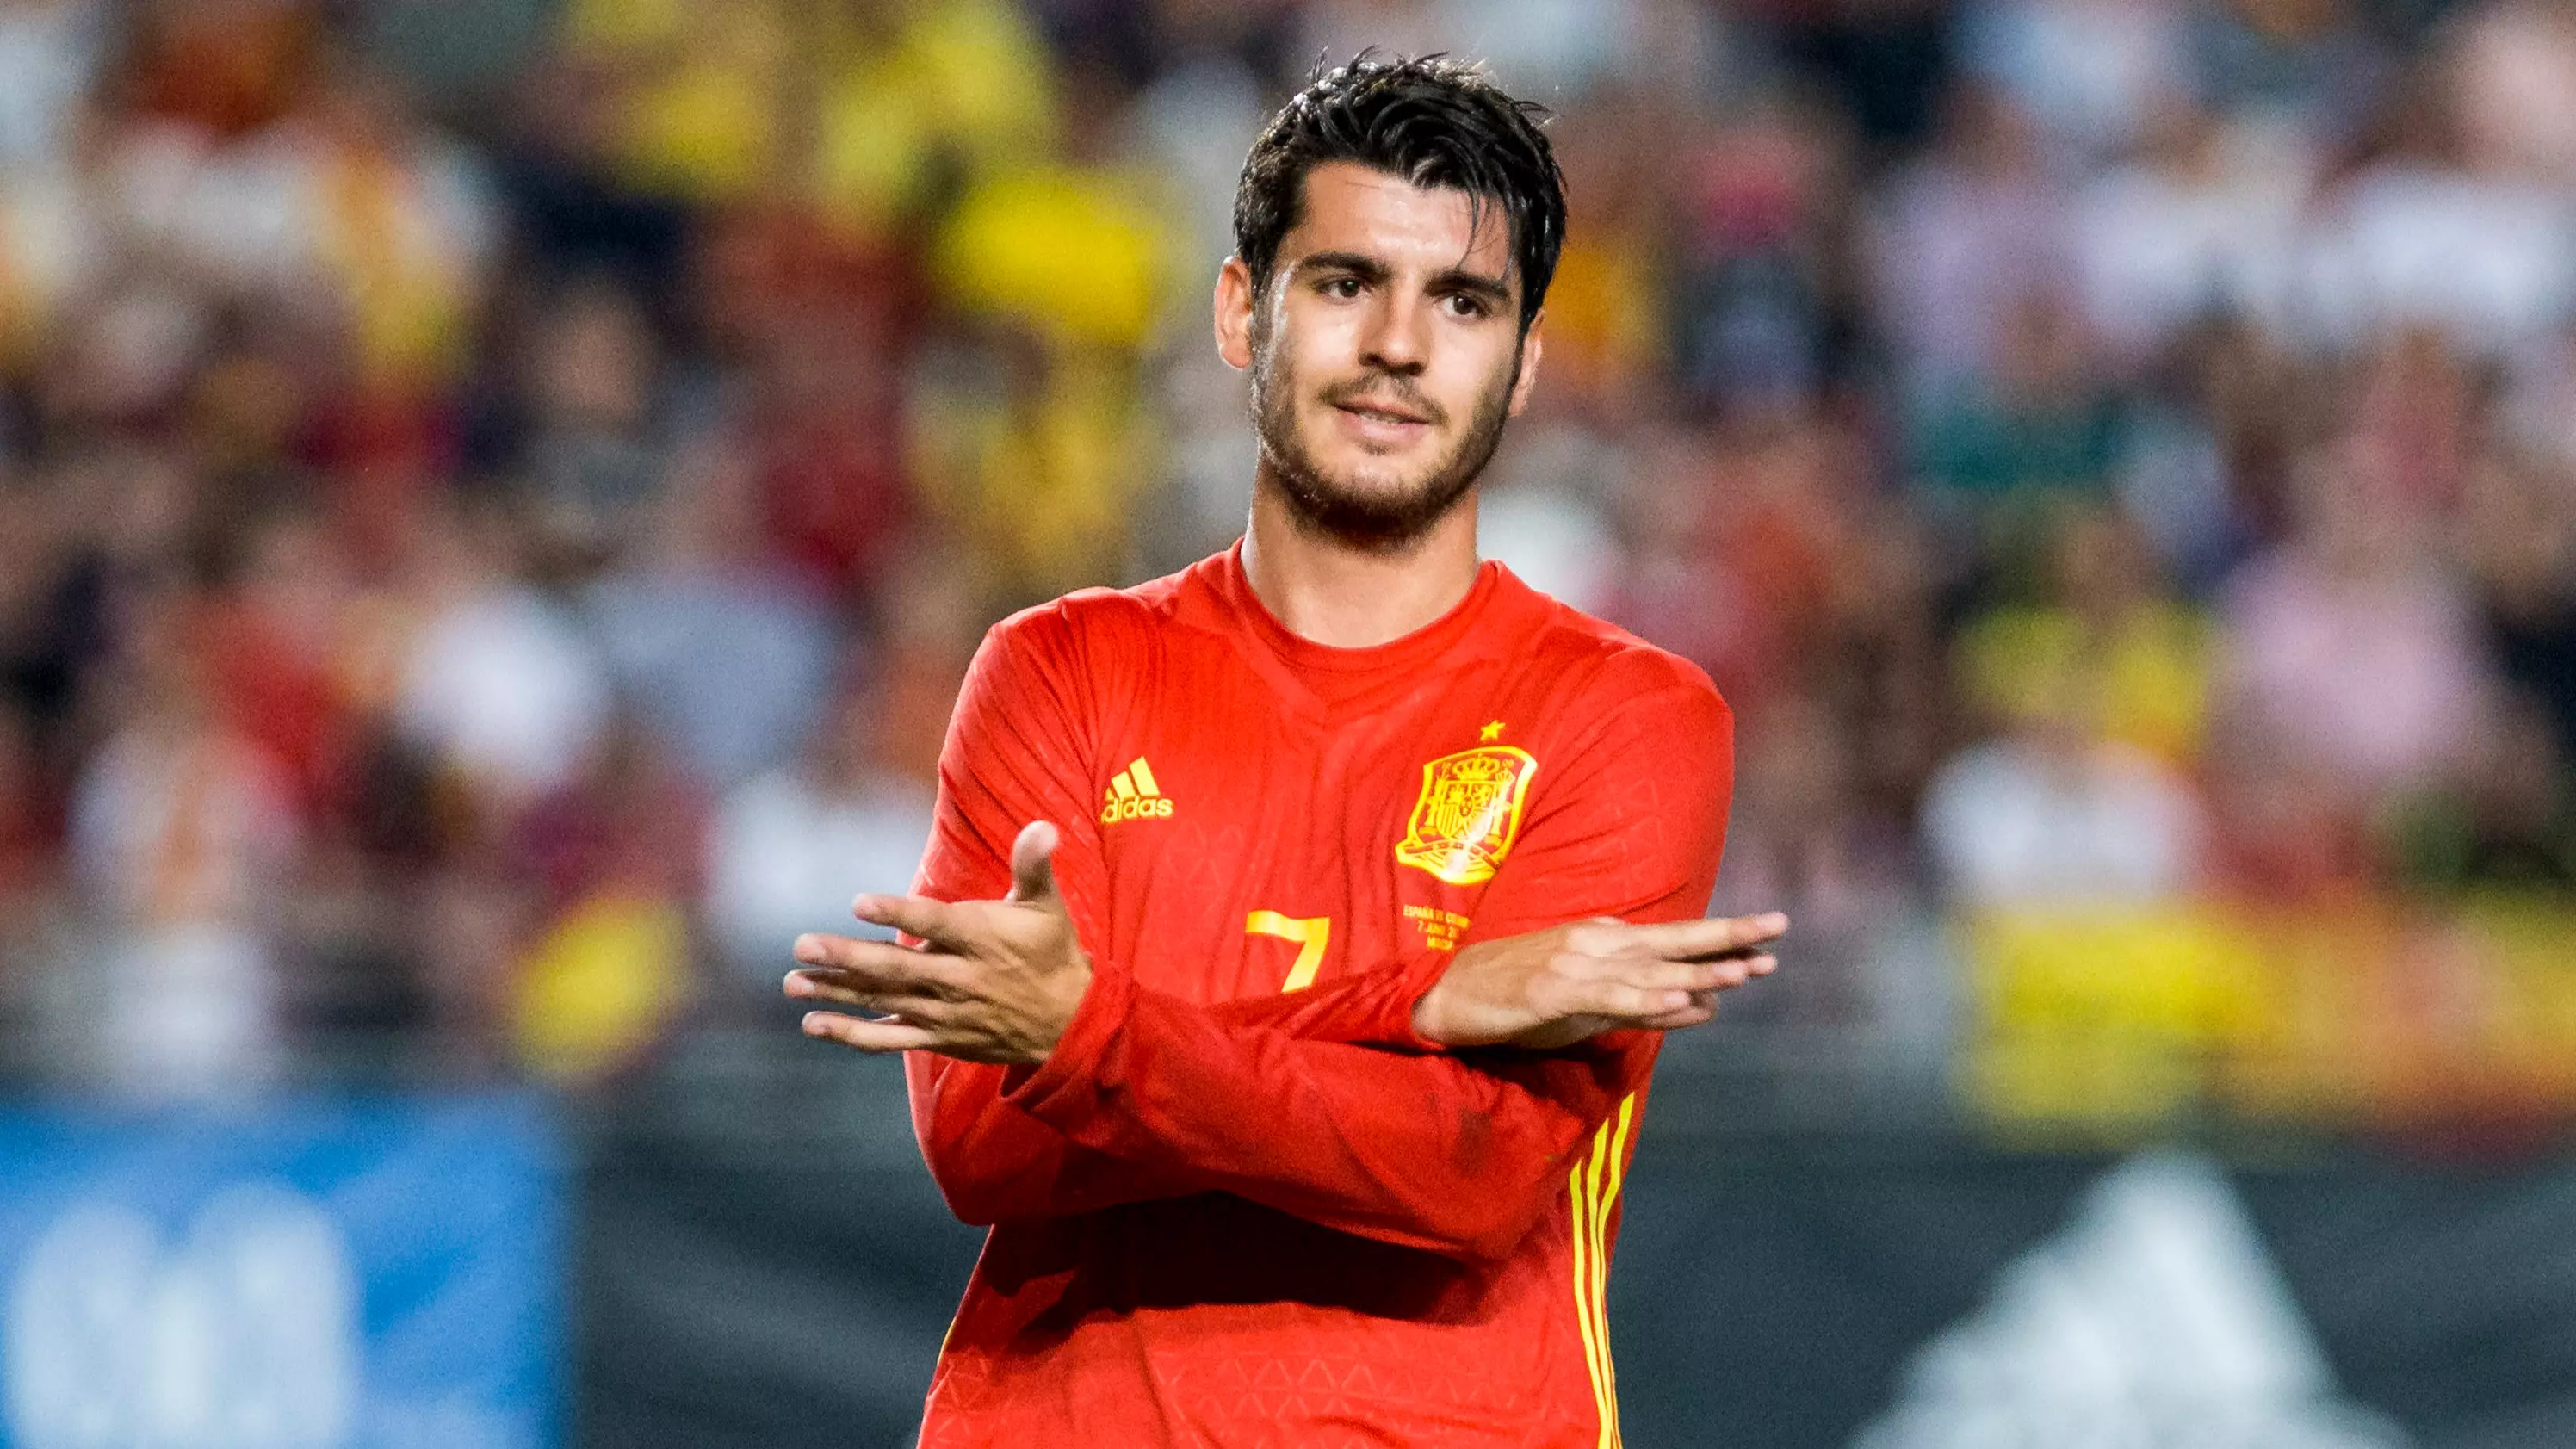 Chelsea Fans May Not Be Happy About Alvaro Morata's Shirt Number